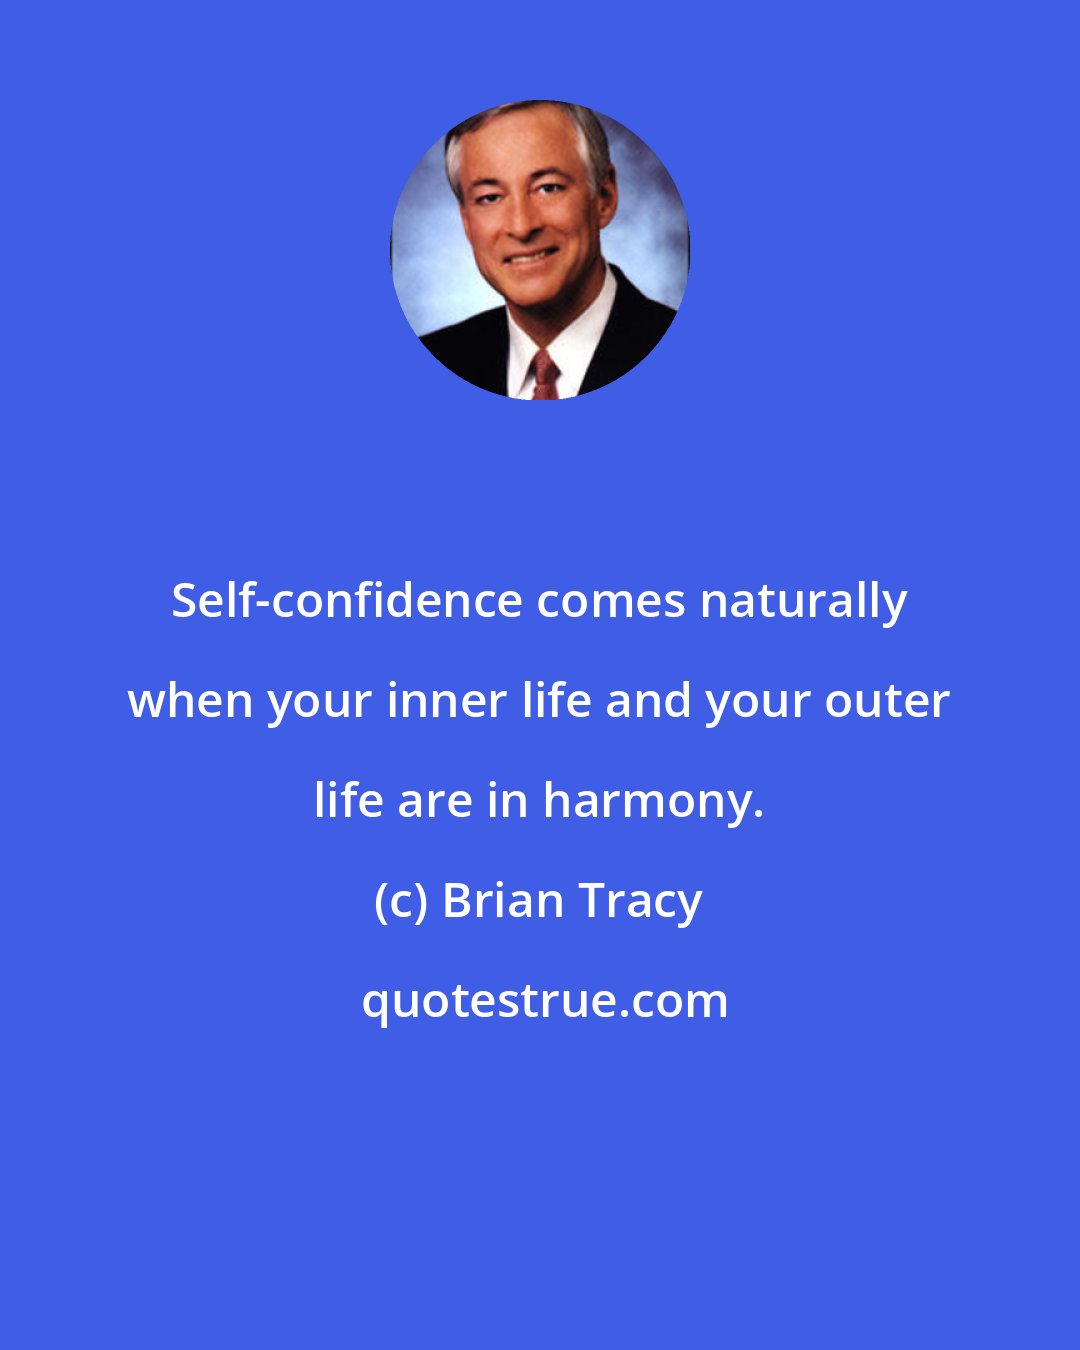 Brian Tracy: Self-confidence comes naturally when your inner life and your outer life are in harmony.